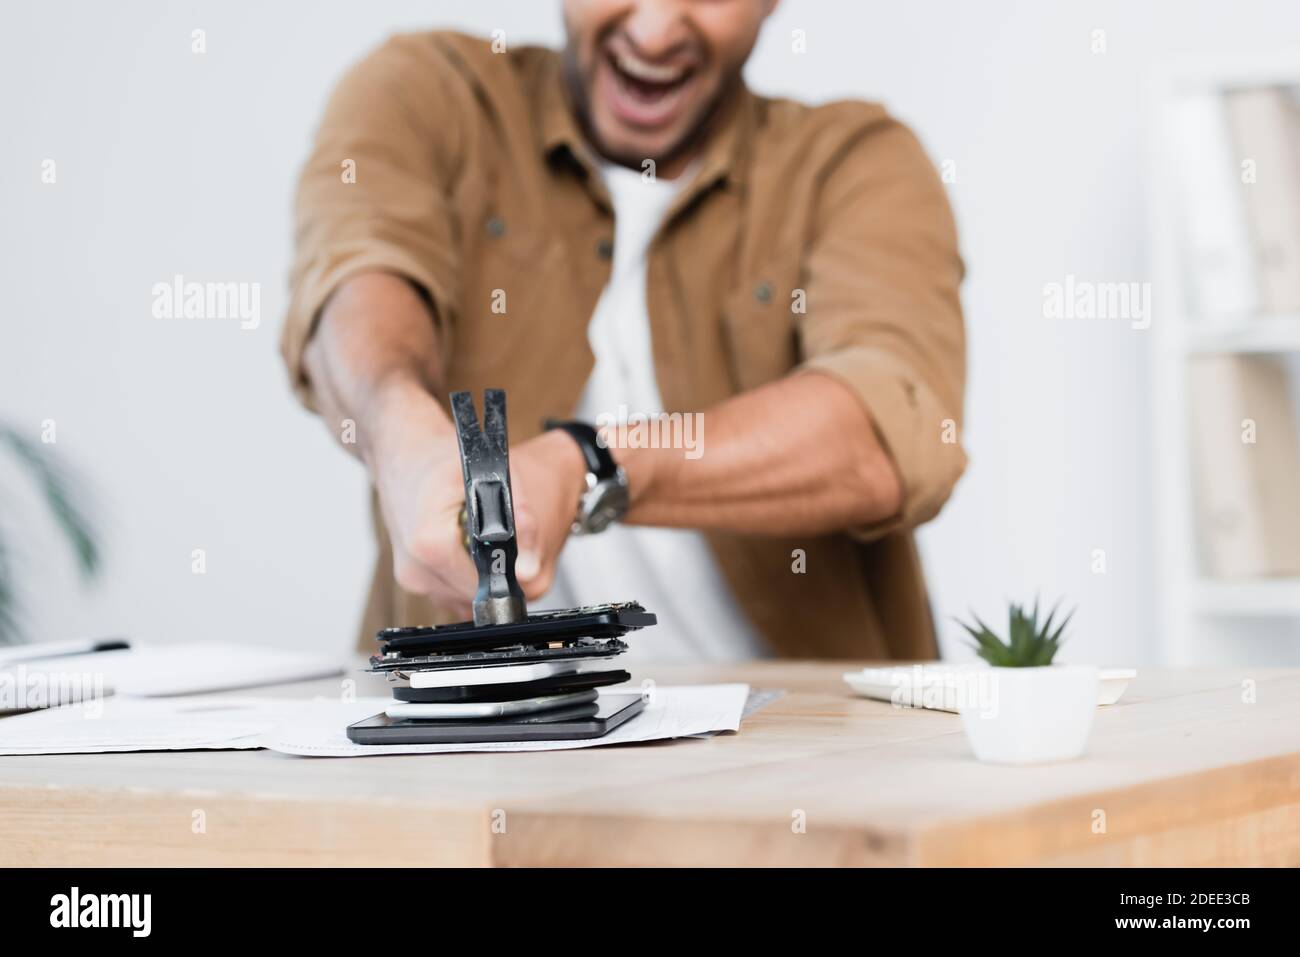 Cropped view of shouting businessman cracking pile of smartphones with hammer on table on blurred background Stock Photo